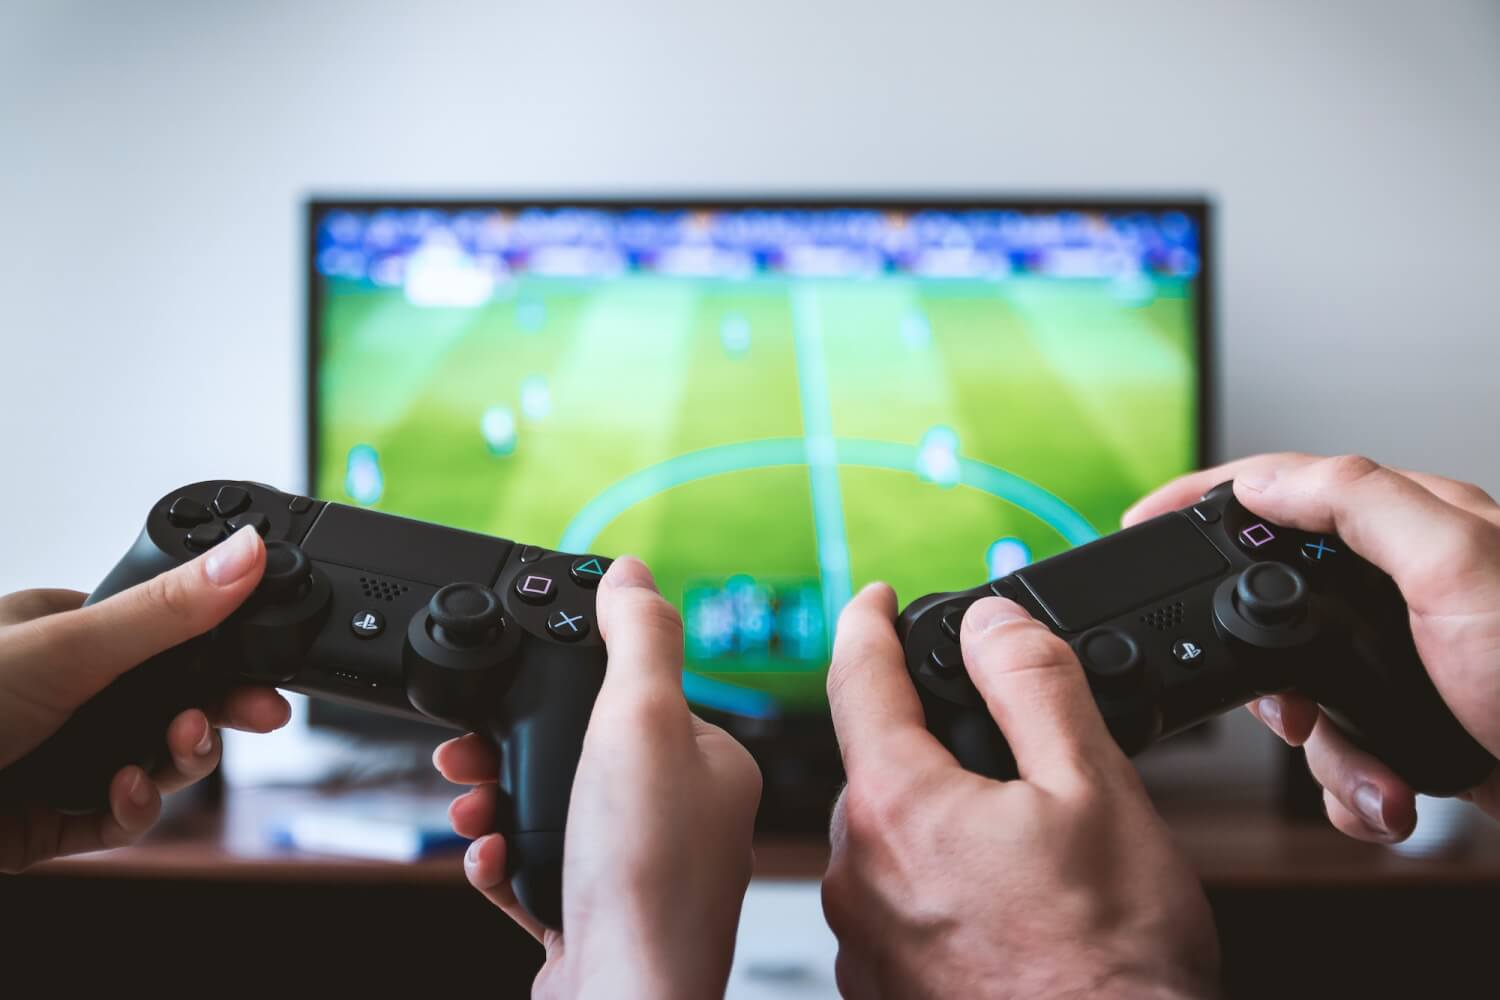 Two hands holding games console controllers in front of a tv screen